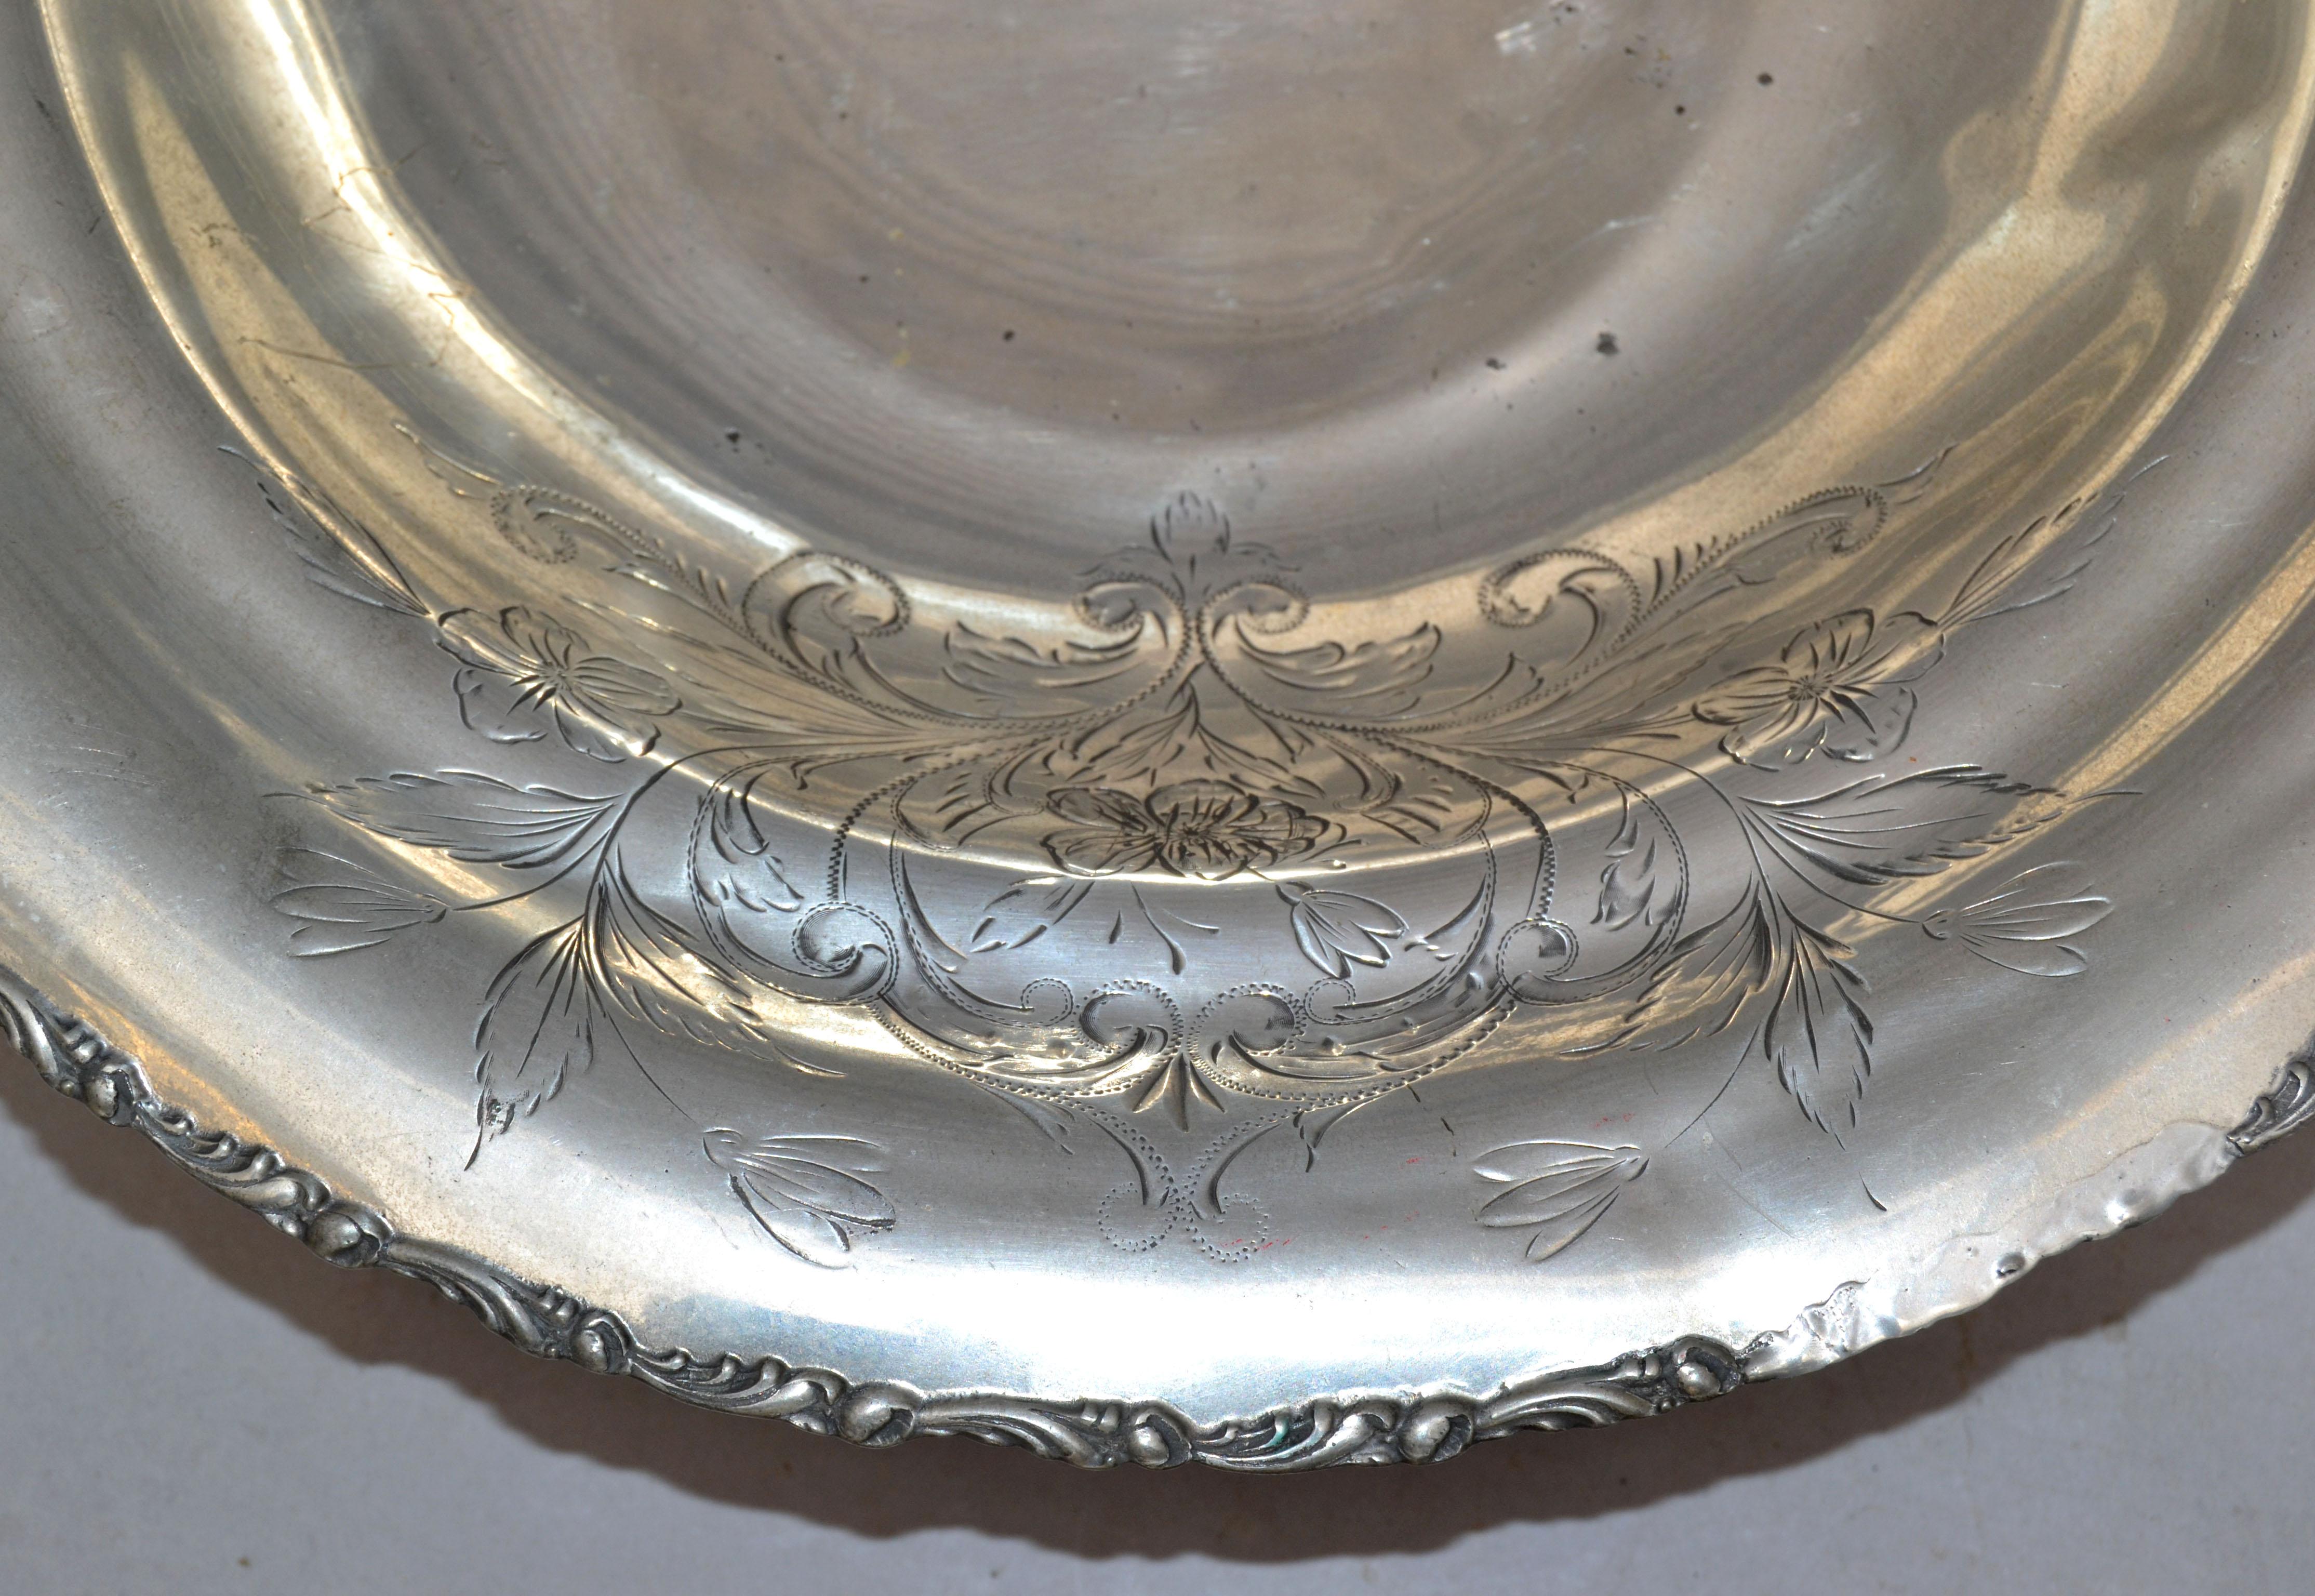 English Silver Plate Trademark Ornate Large Bowl Footed Serving Dish Punch Bowl im Zustand „Gut“ im Angebot in Miami, FL